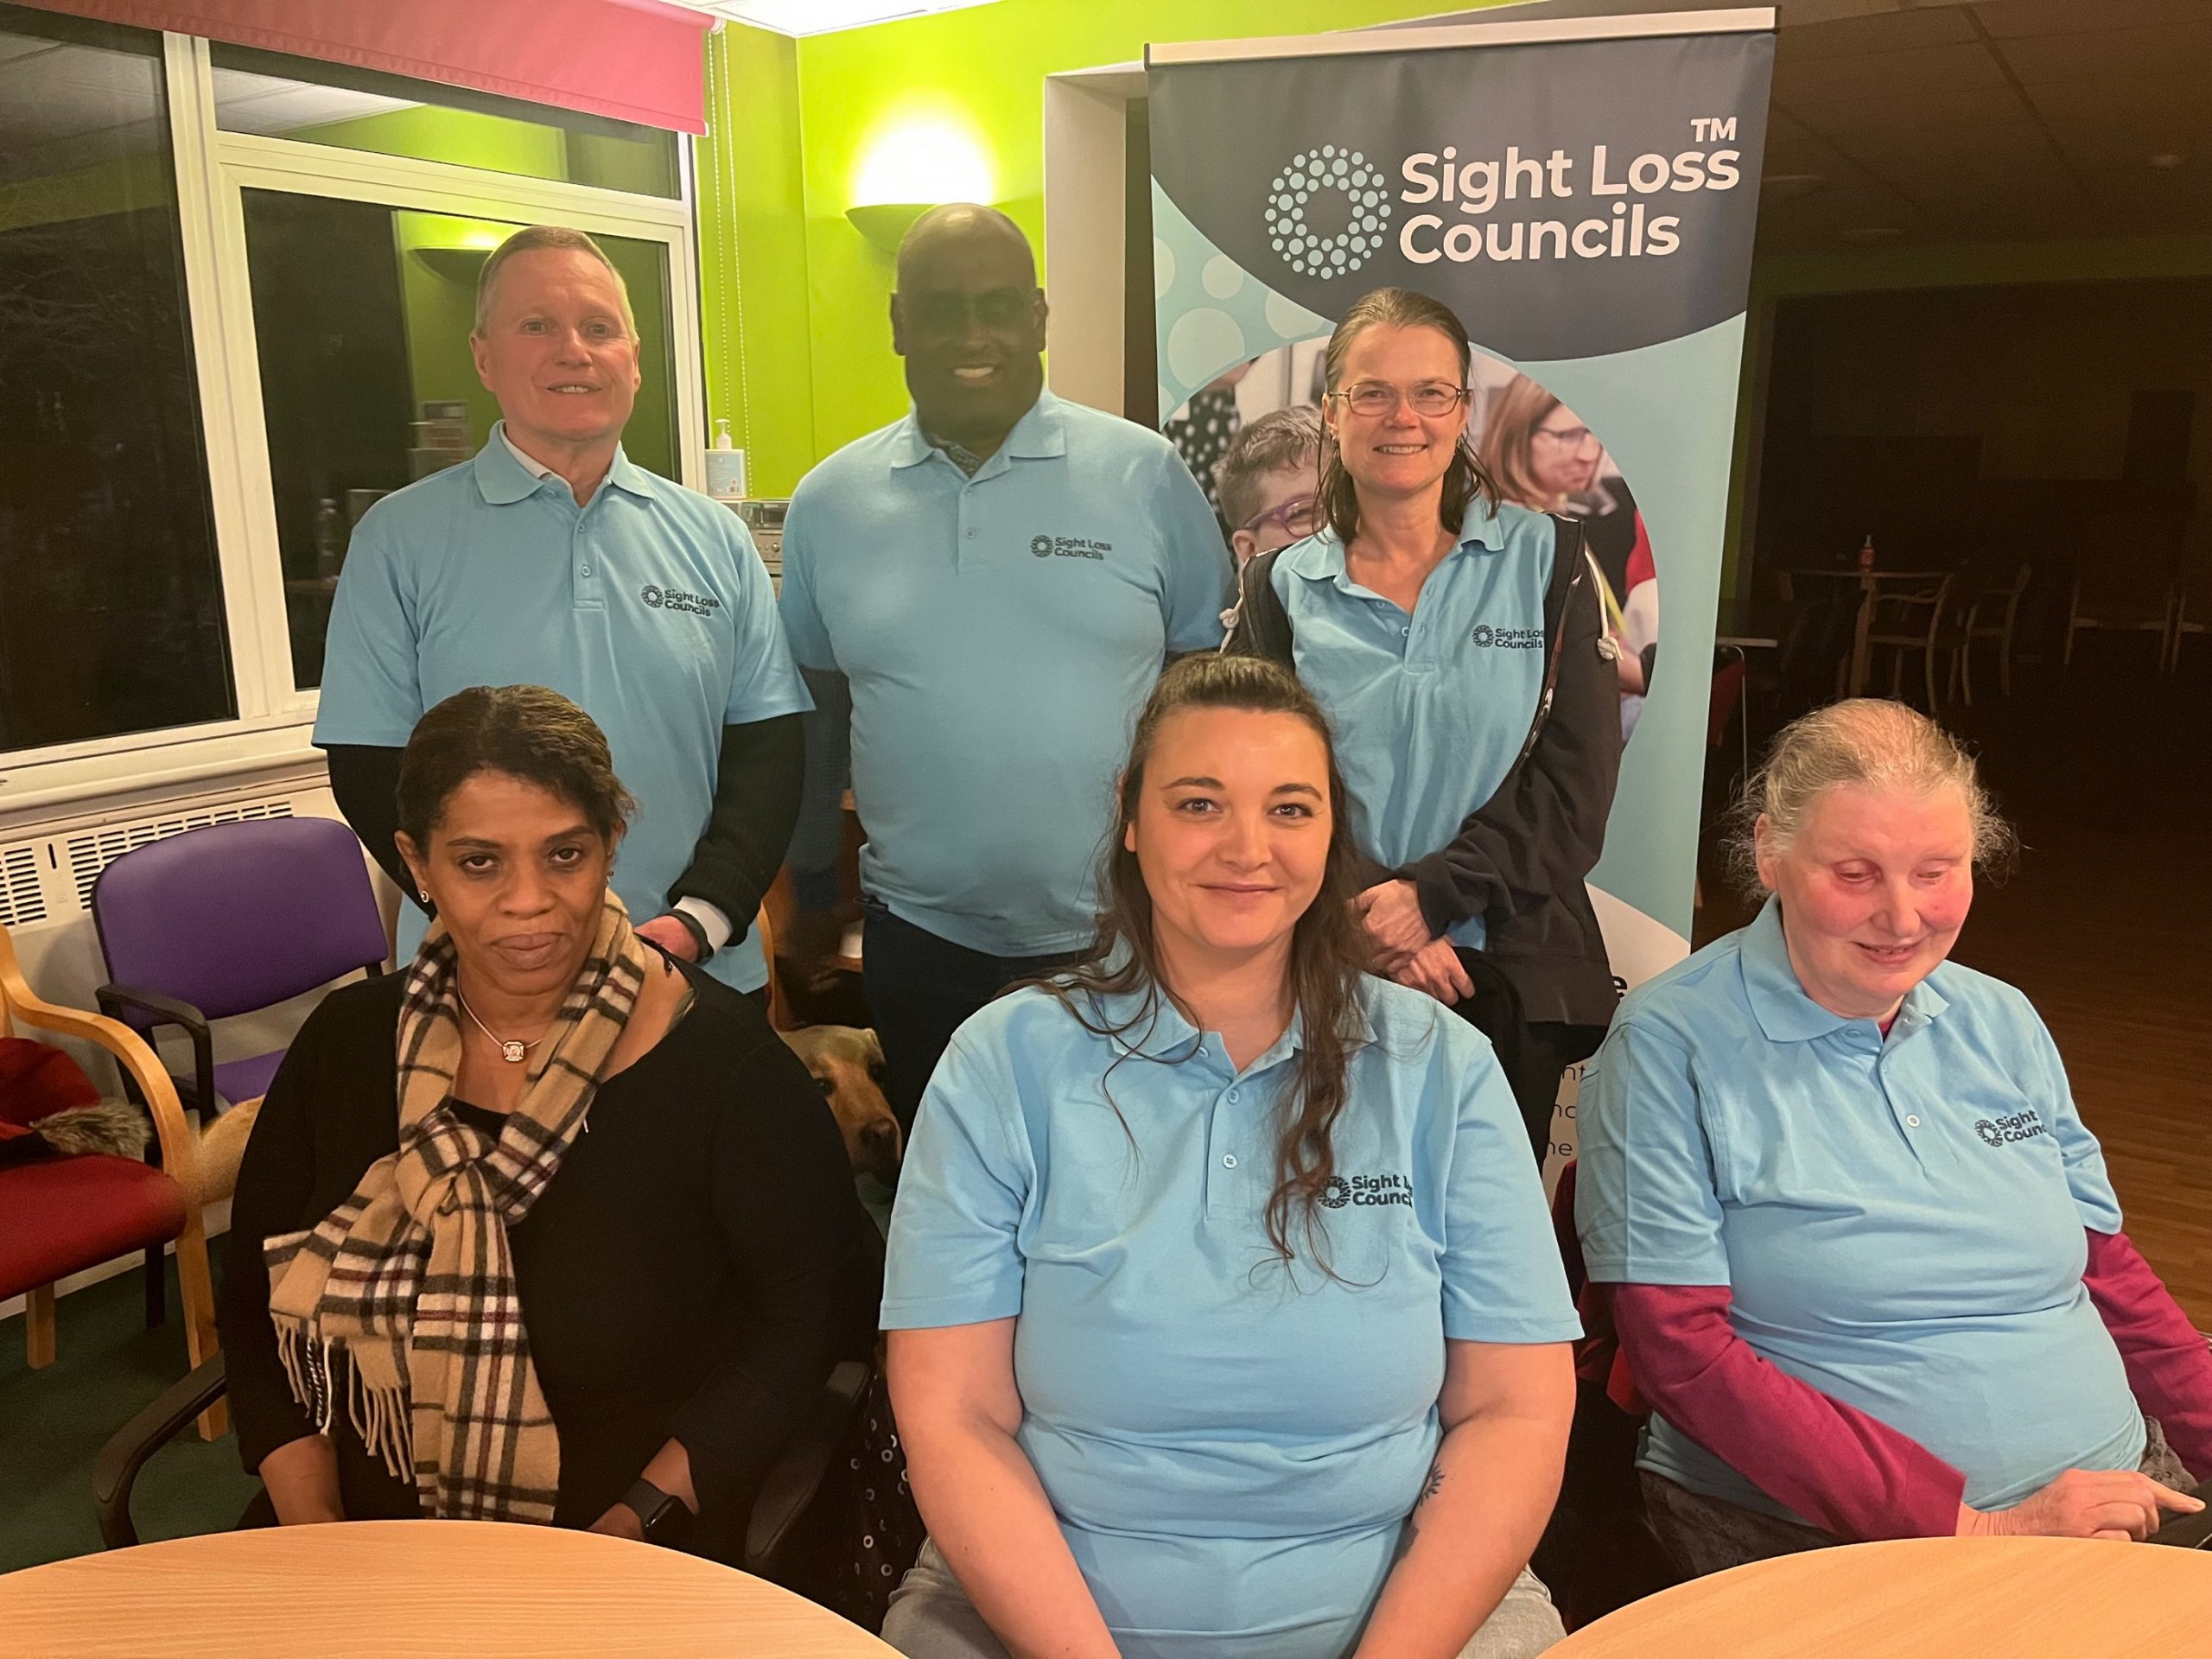 SW London SLC members. Top row, from left to right: Harry Meade, Haren Thillainathan and Vicky Blencowe. Bottom row , from left to right: Jennifer Smith, Nikki Hughes and Mary Cox